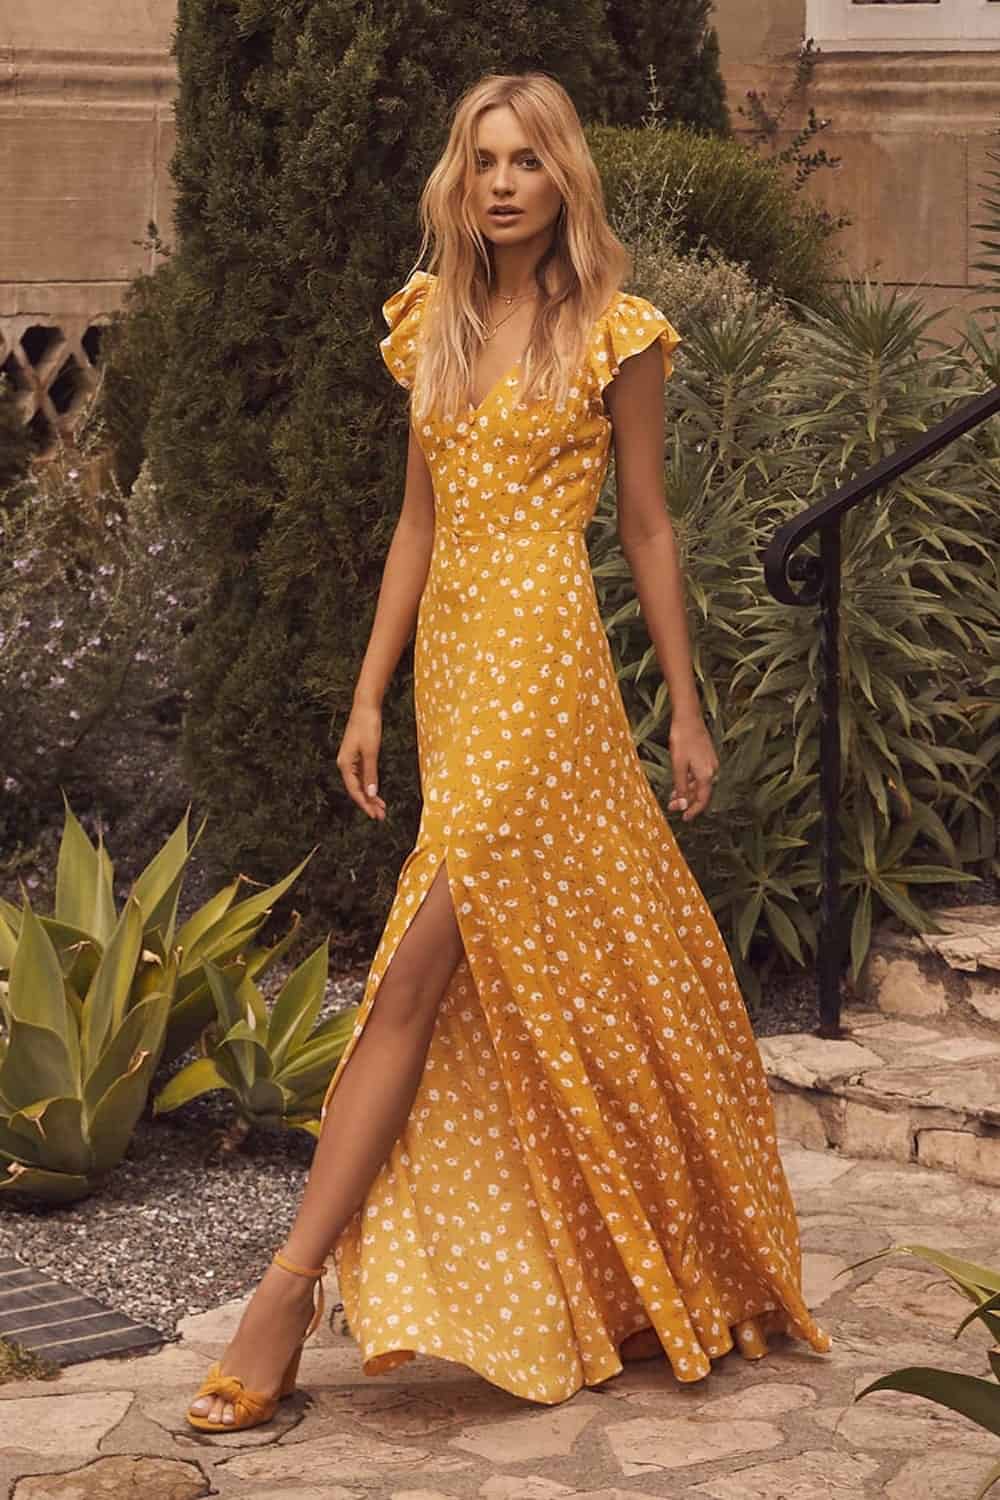 image of a woman wearing a long yellow floral maxi dress walking down a sidewalk with green plants in the background 